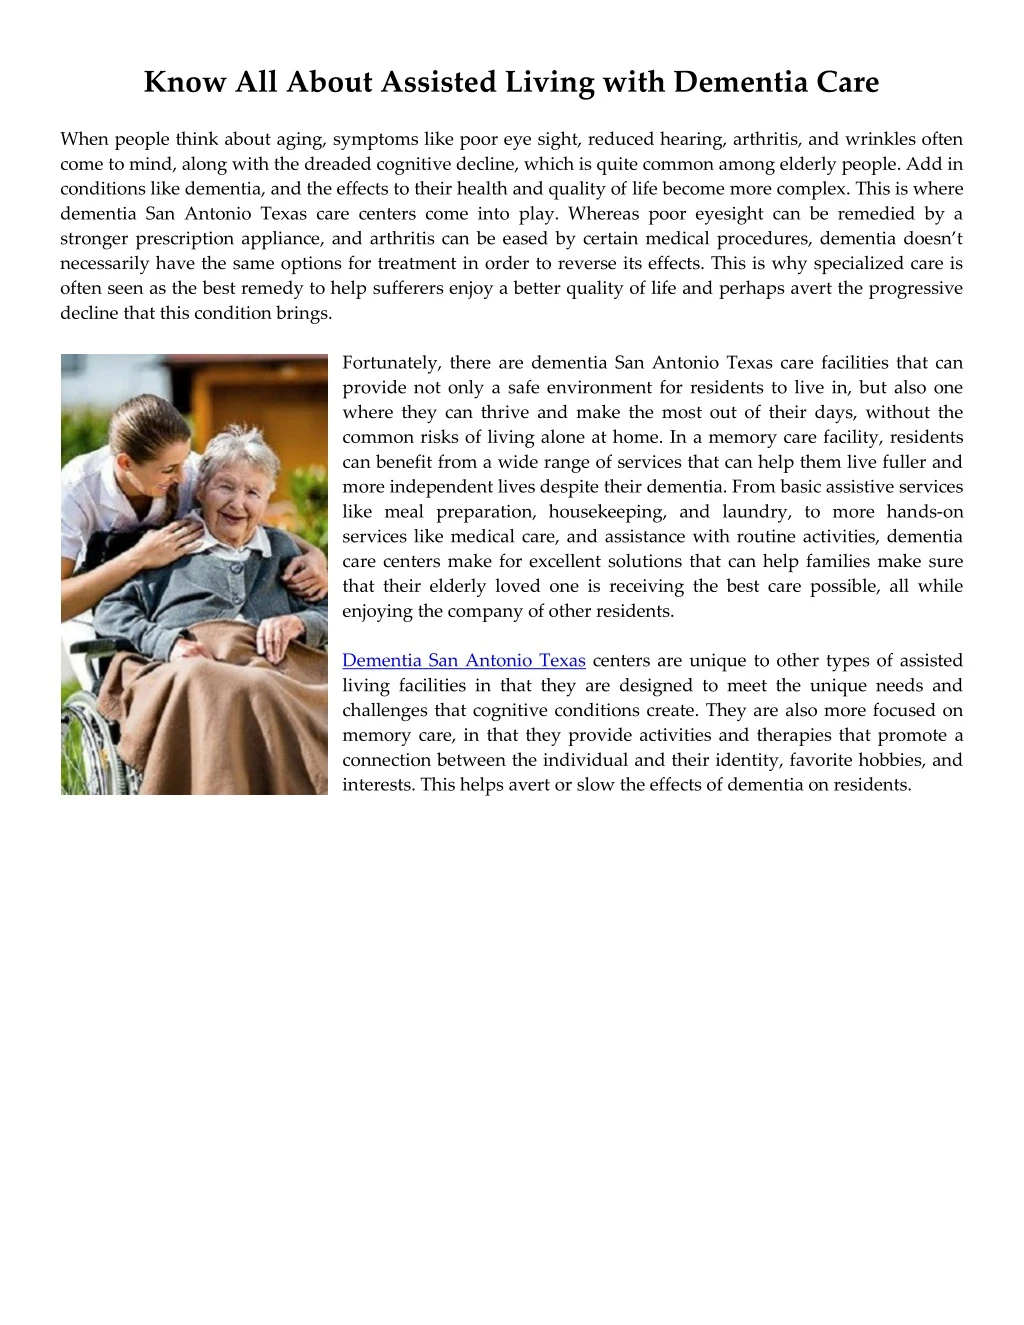 know all about assisted living with dementia care